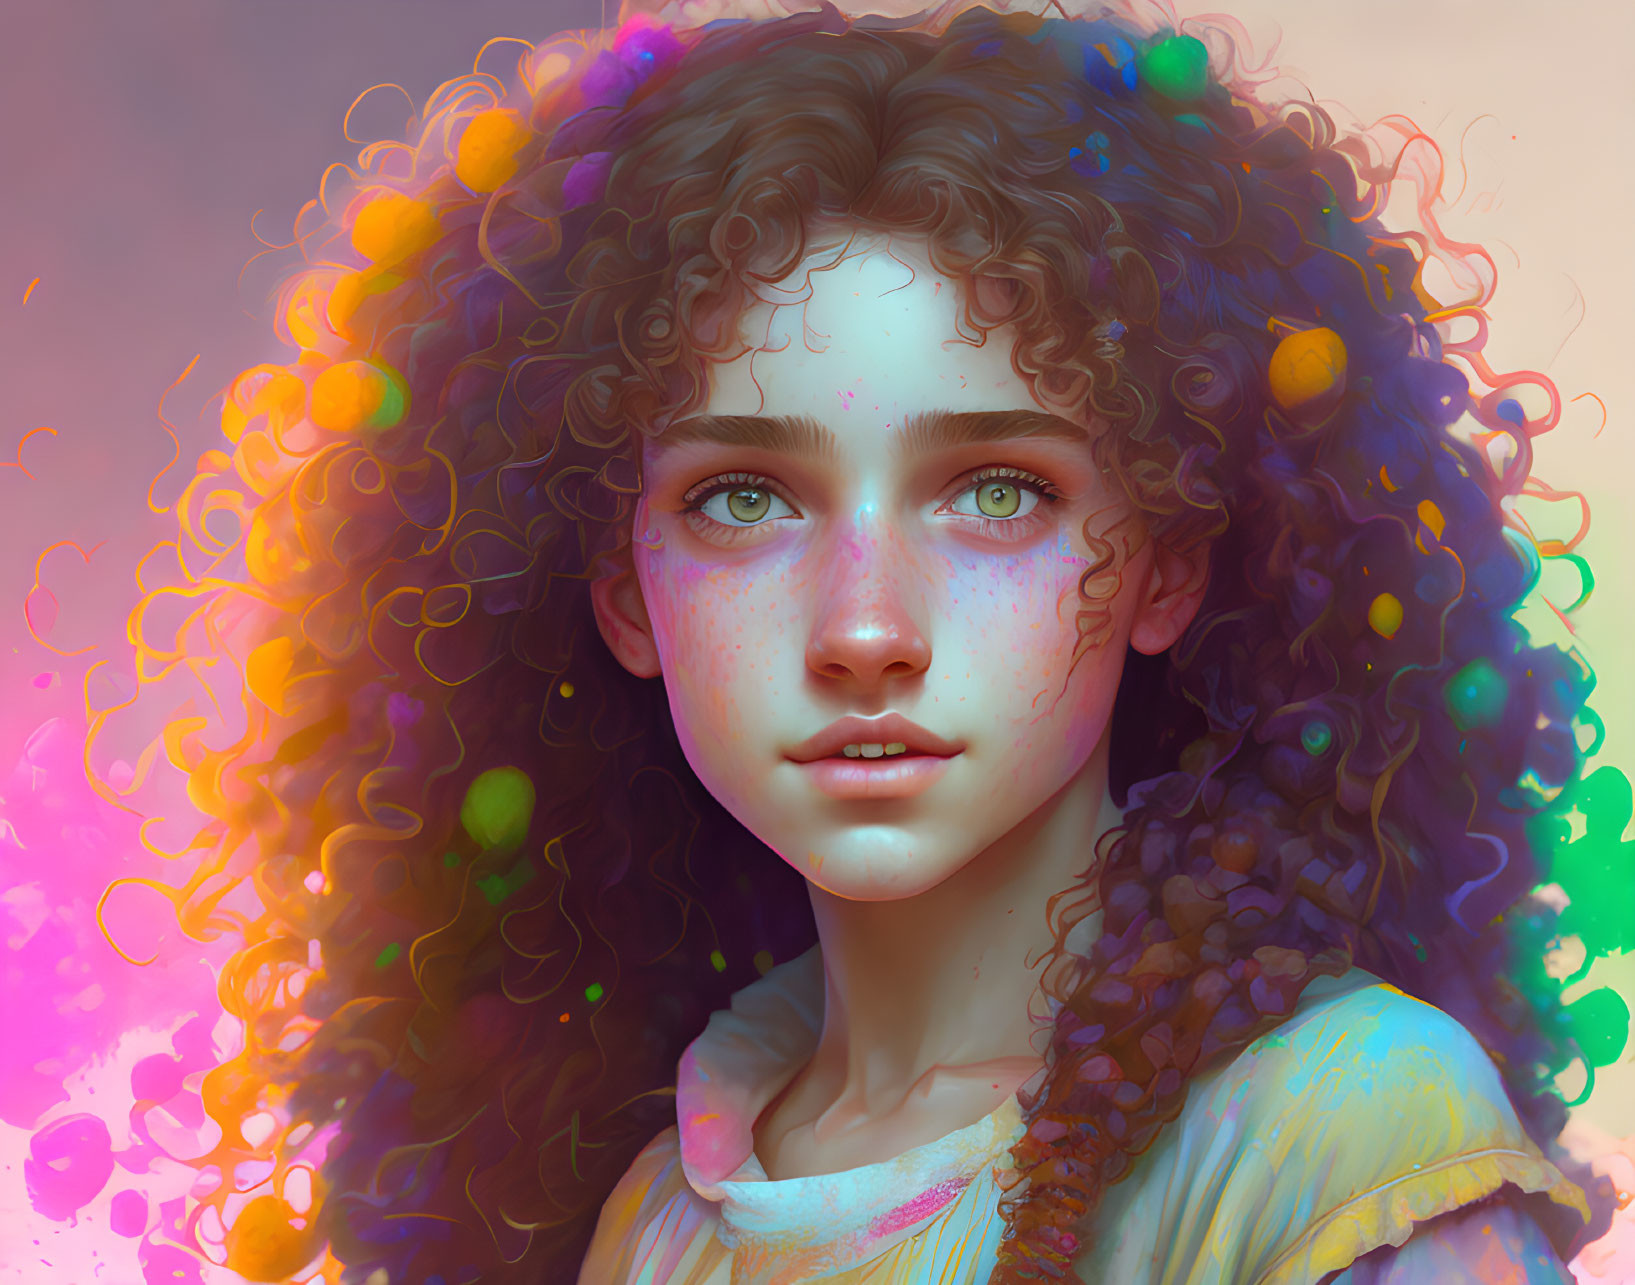 Curly-haired girl with blue eyes in dreamy pink ambiance